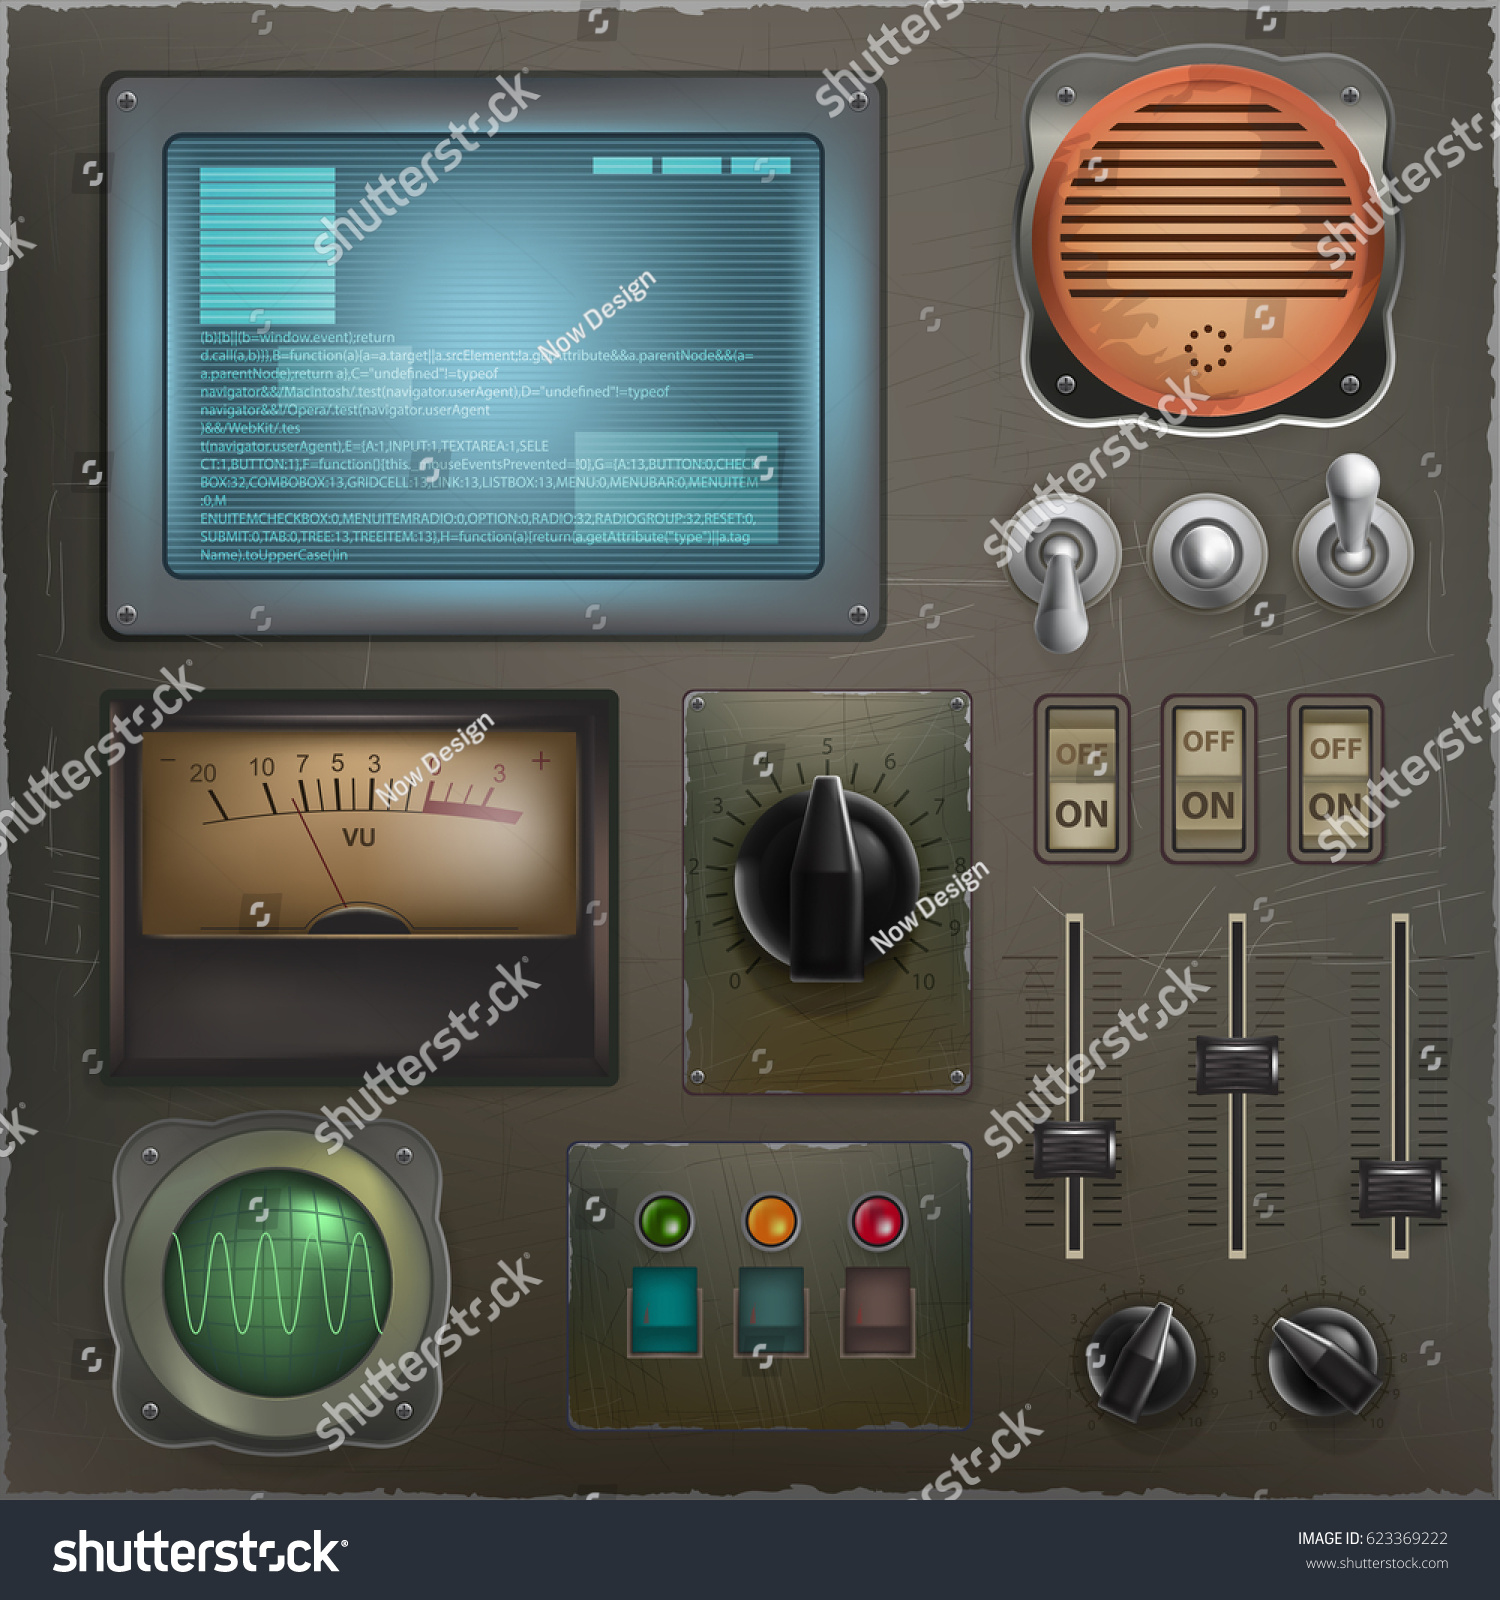 Stylized Retro Control Panel Set Different Stock Vector Royalty Free